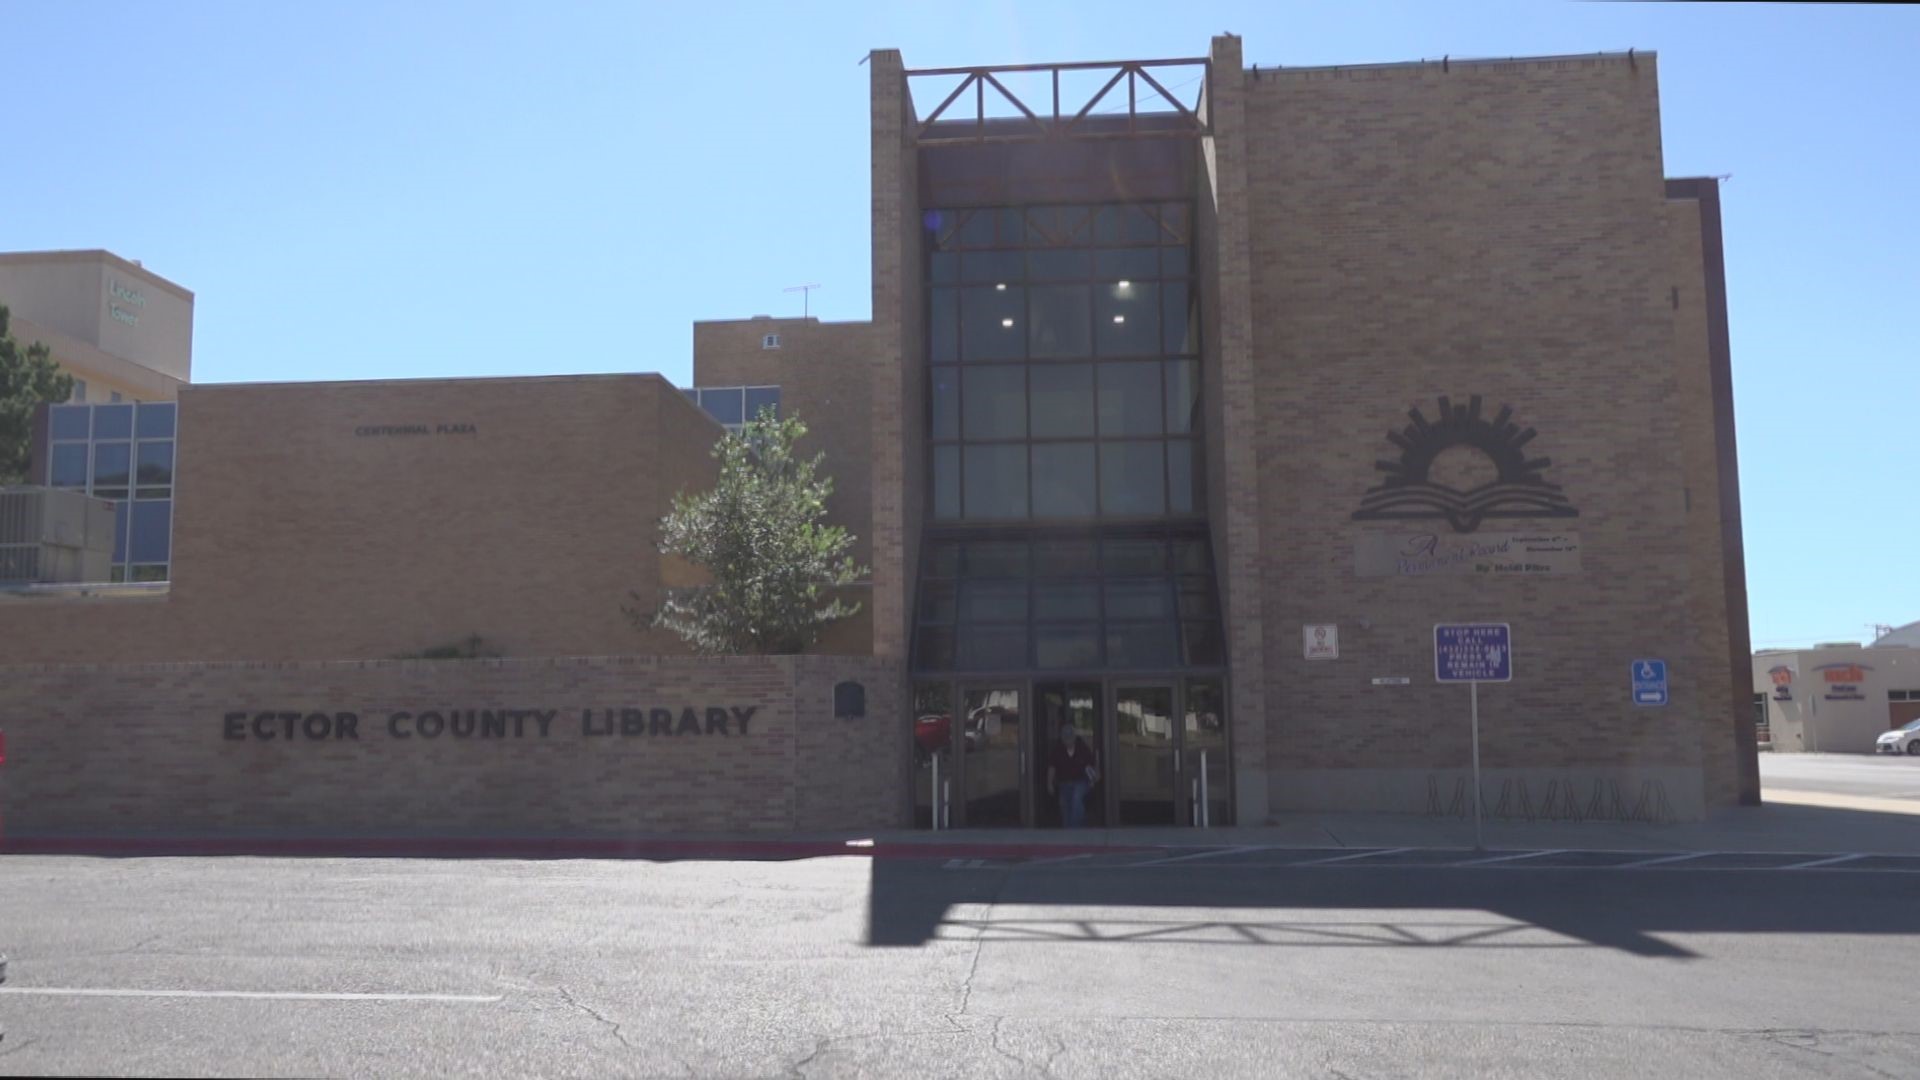 The decision was made during an Ector County Commissioners Court meeting Tuesday.